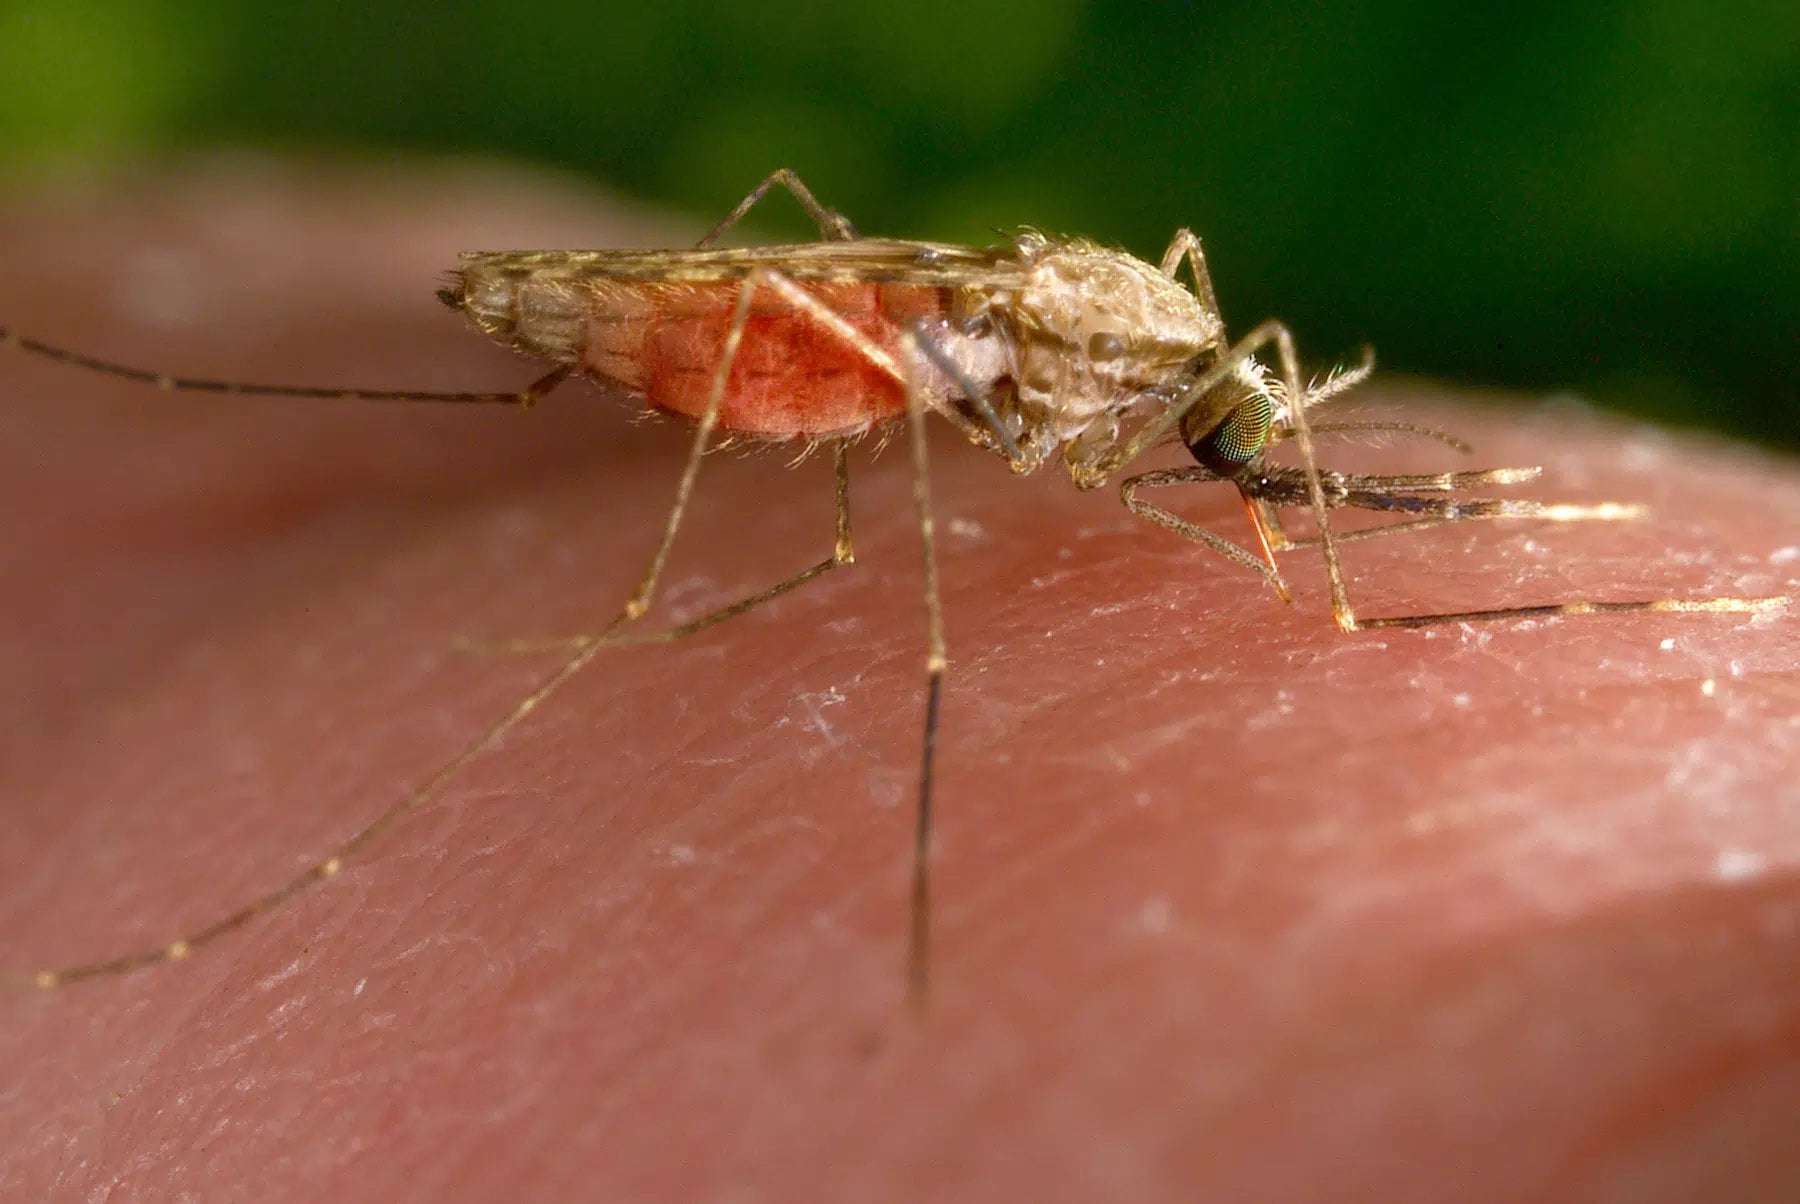 image for Malaria cases in Texas and Florida are the first US spread since 2003, CDC says